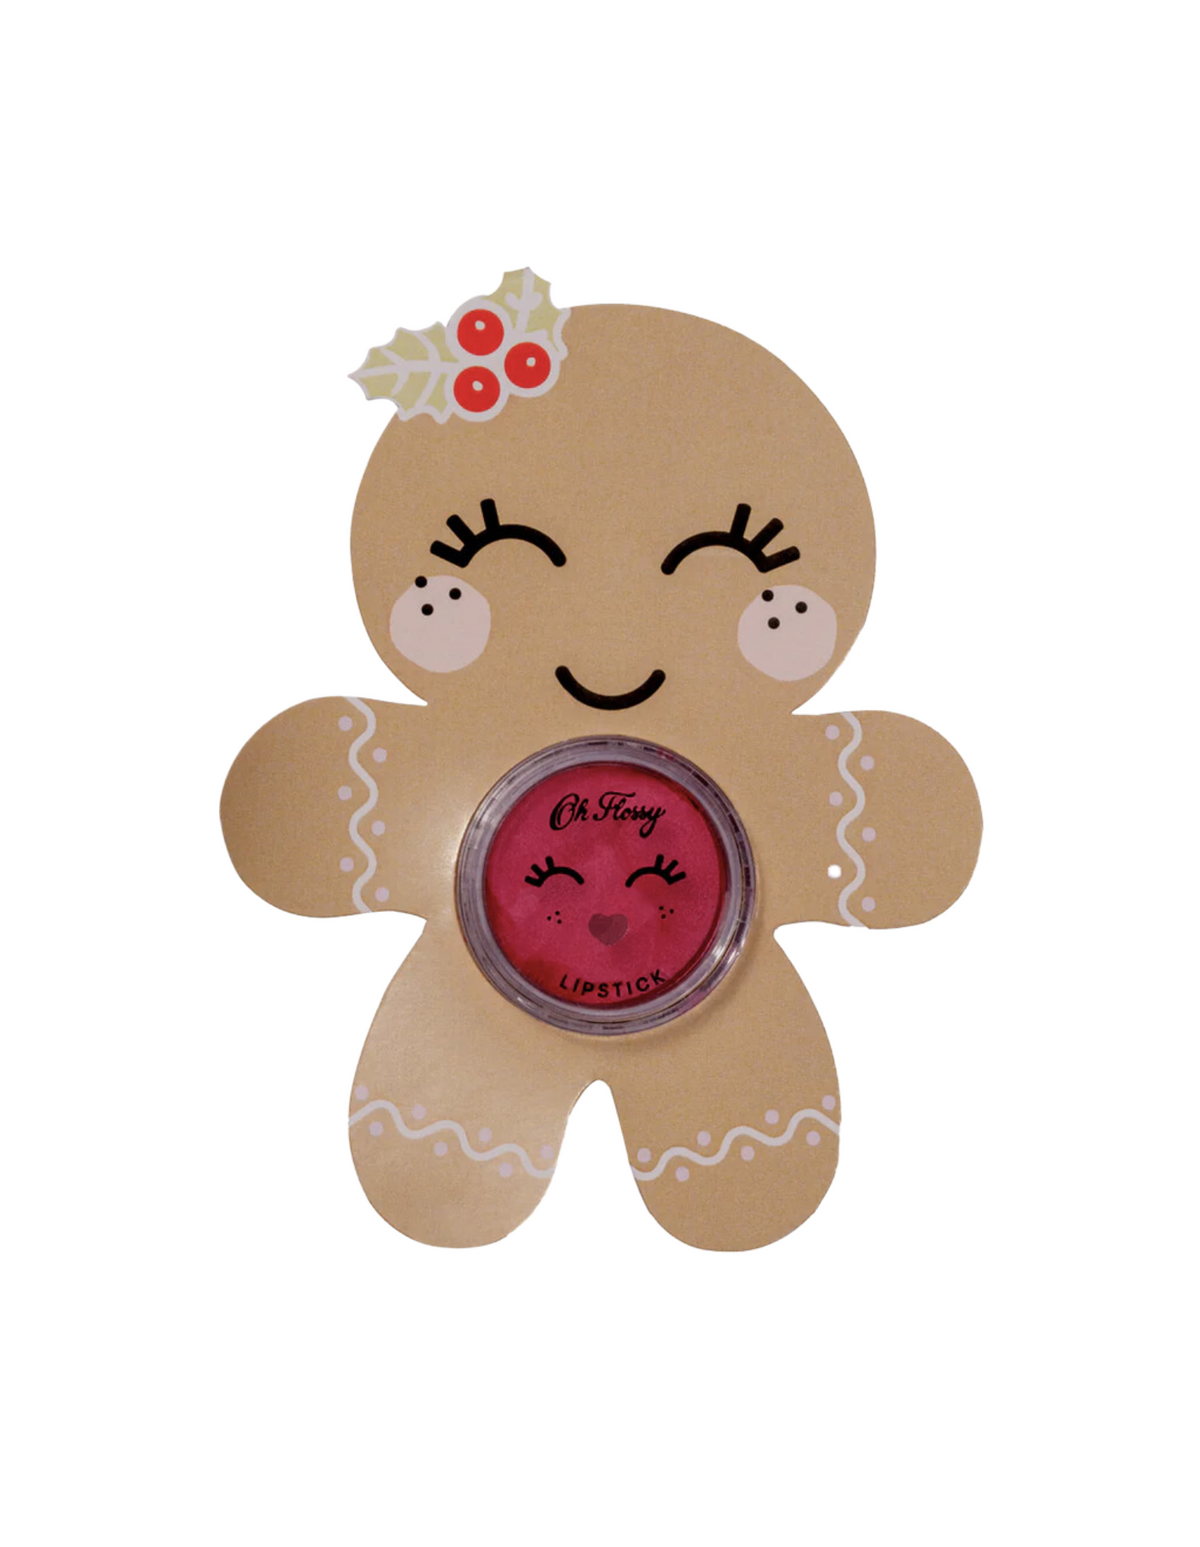 Xmas - Lipstick Gingerbread Girl - Oh Flossy